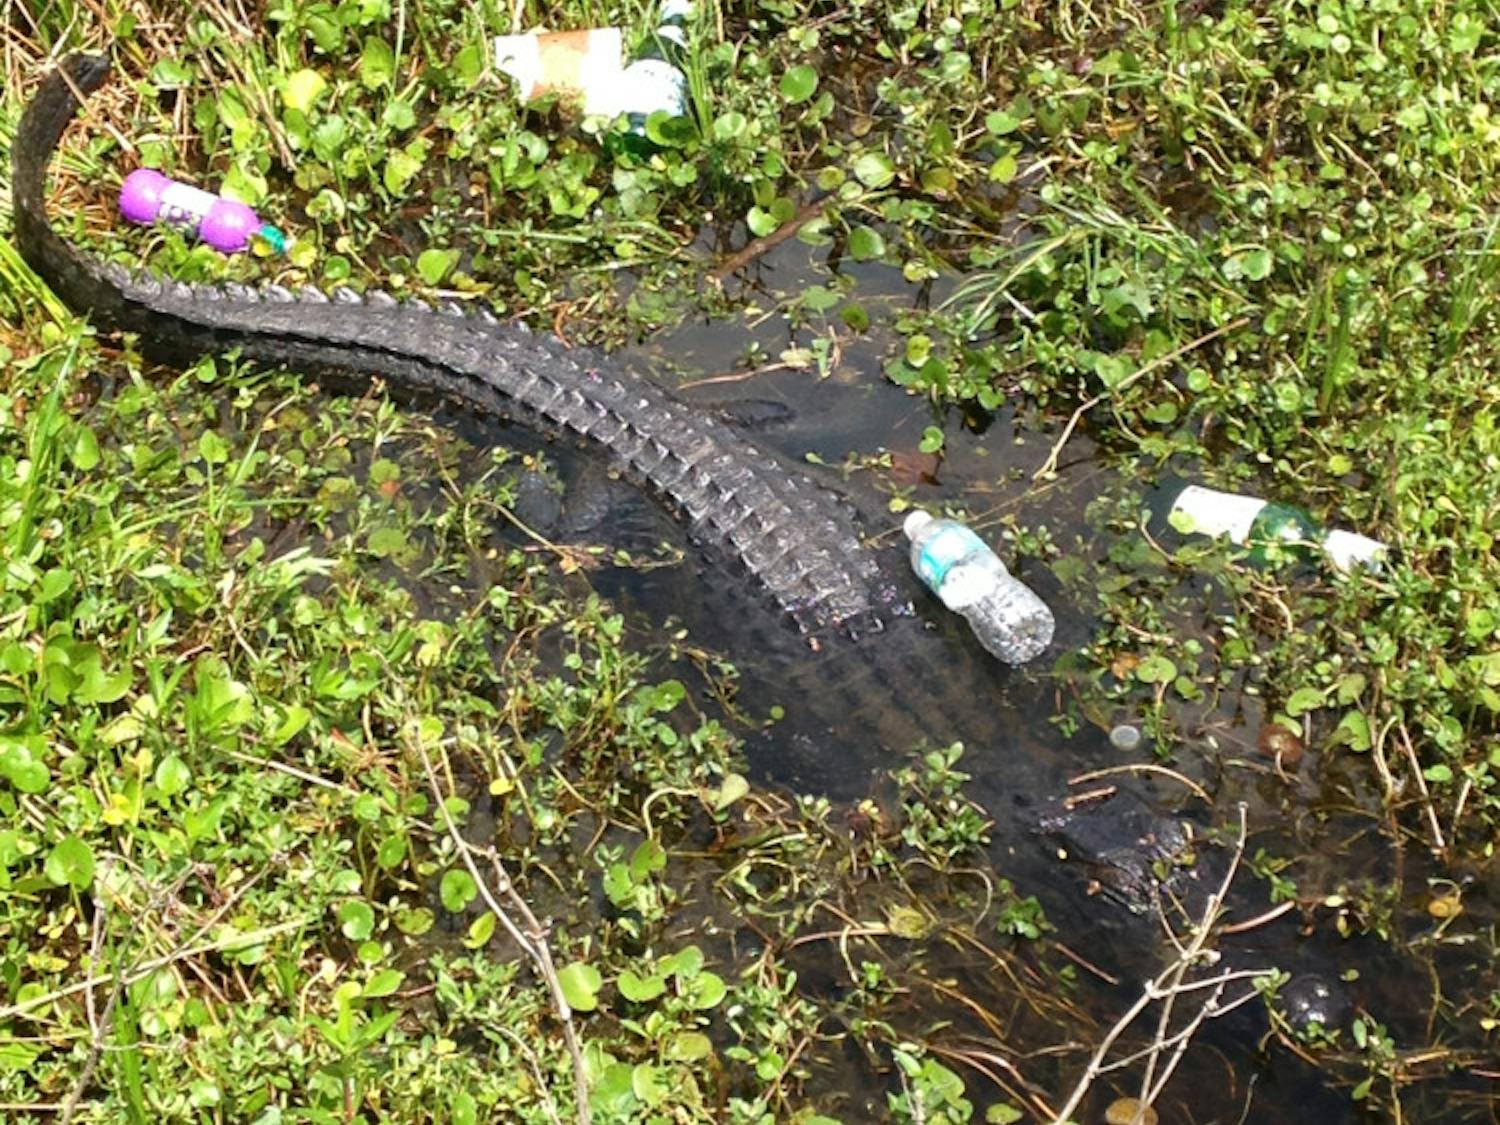 Empty bottles and other miscellaneous particles of garbage surround a six-foot Florida alligator as it suns itself besides the look out dock off of 441 on the Payne's Prairie Preserve State Park, Saturday April 18, 2015.